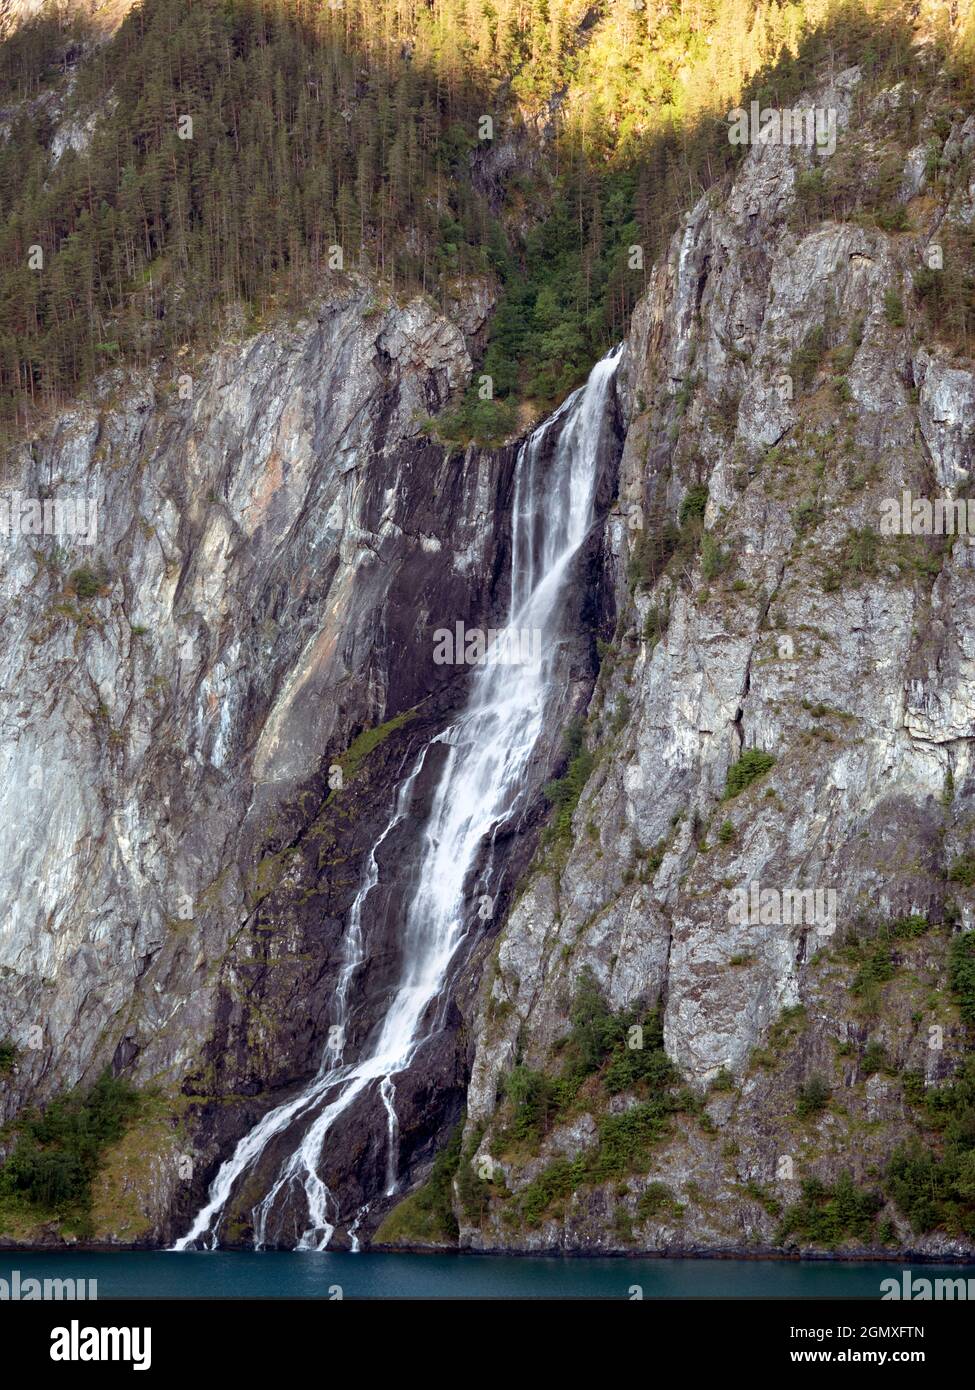 The N¾r¿yfjord is a fjord in the municipality of Aurland in Sogn og Fjordane, Norway. The scenic narrow fjord is a branch of the larger Sognefjord: th Stock Photo